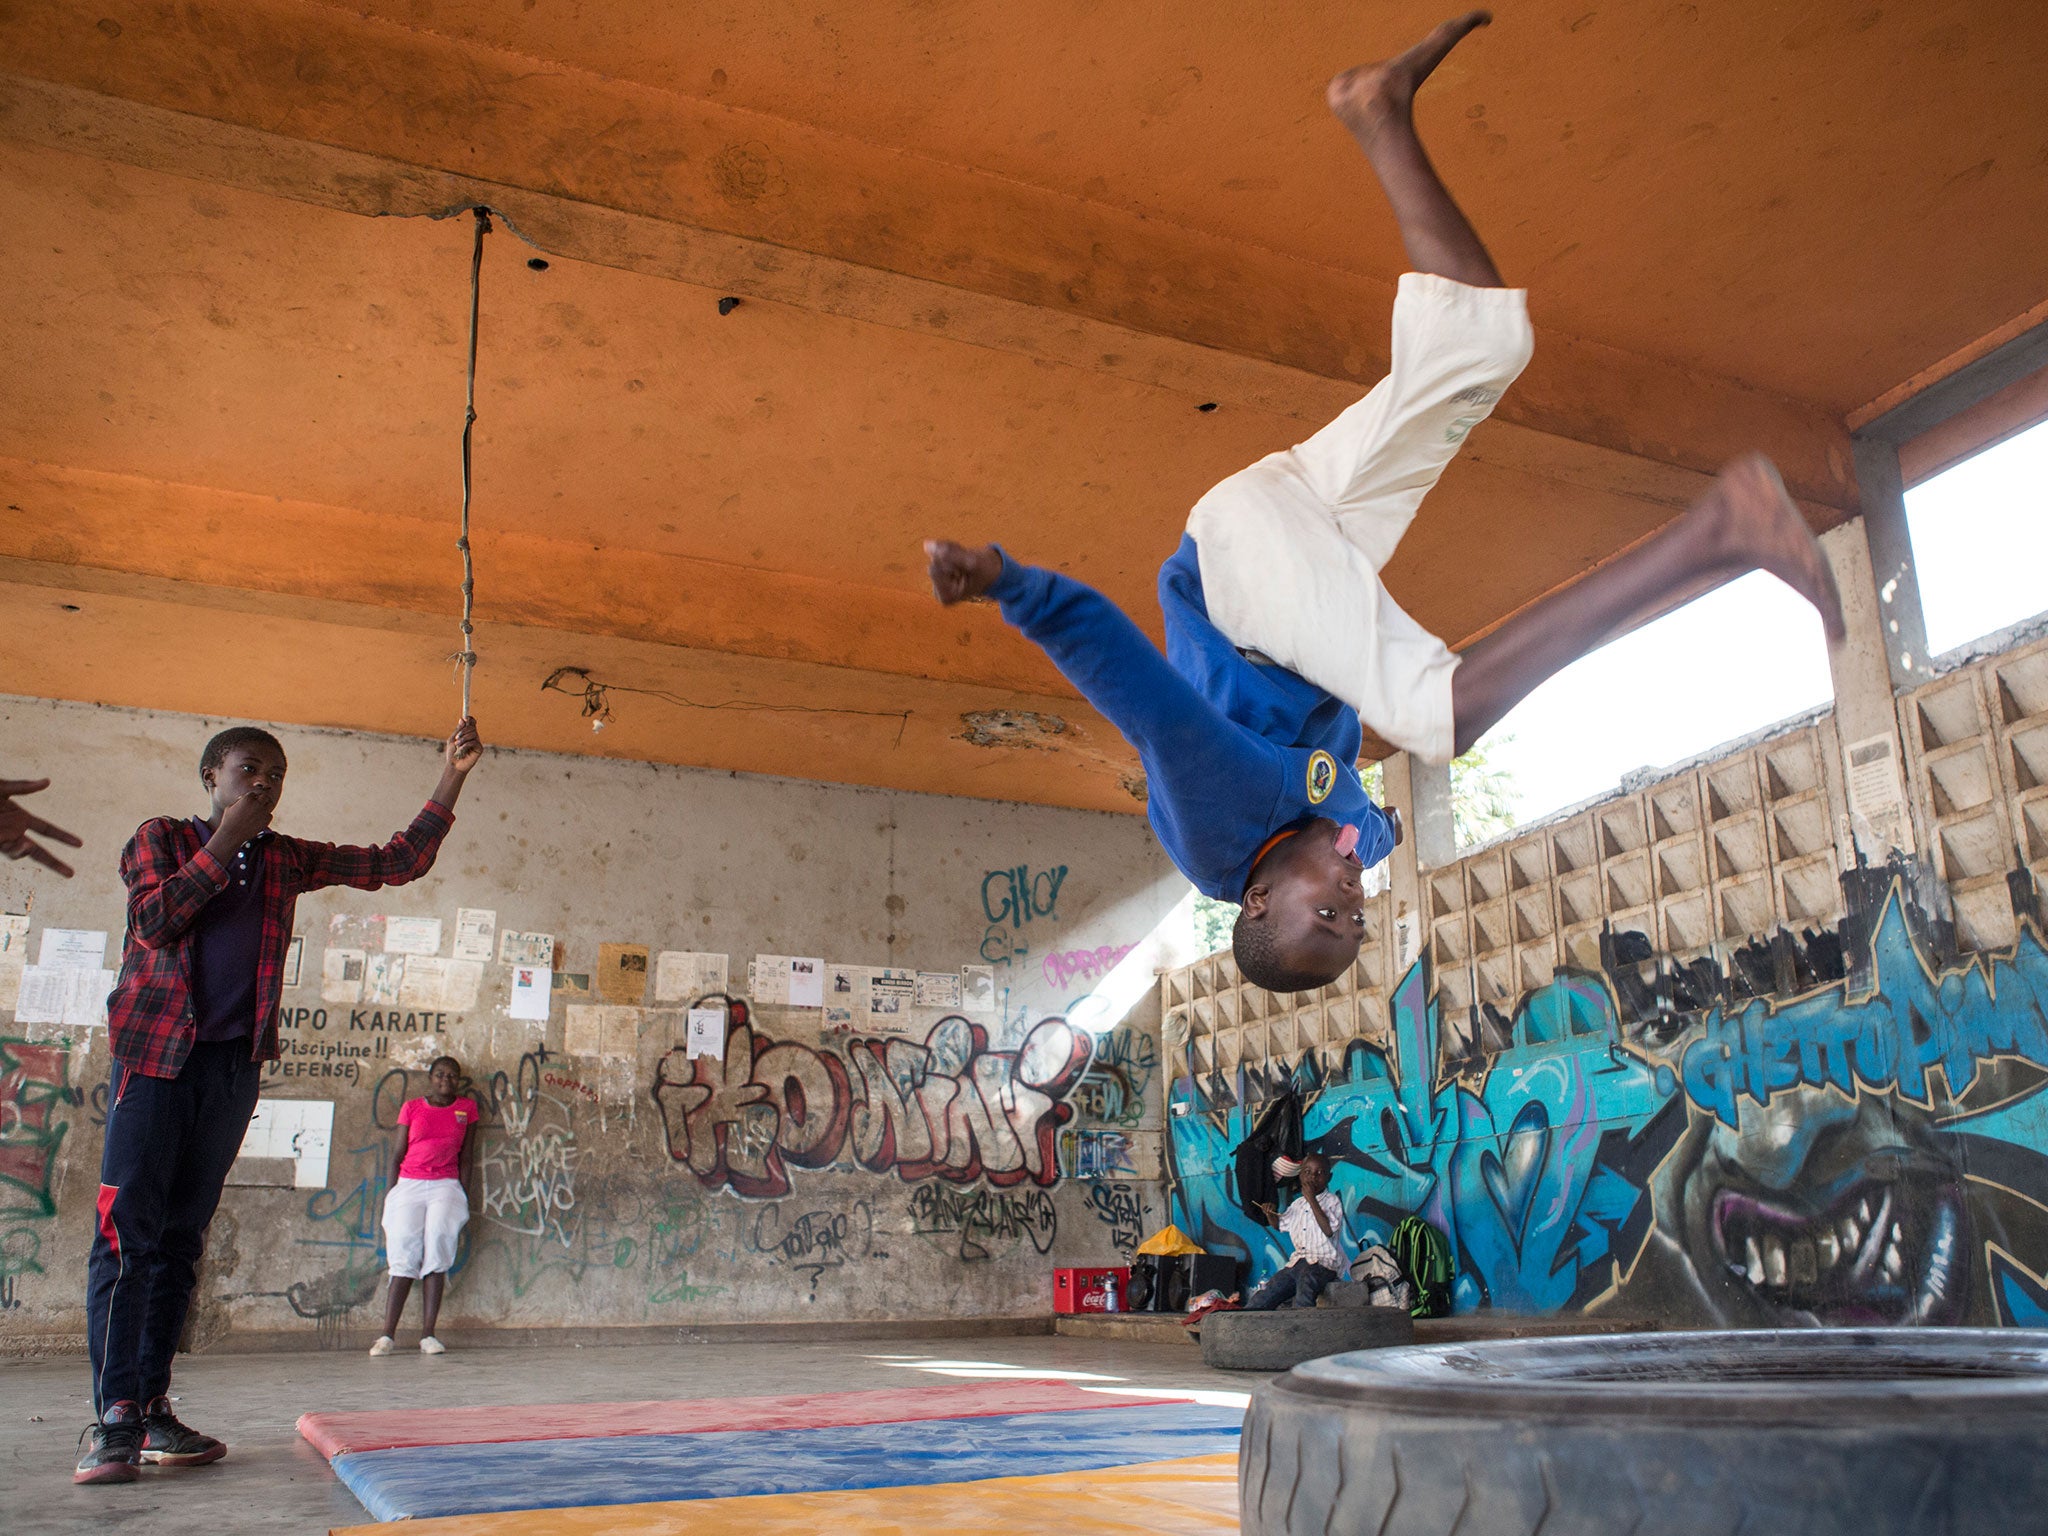 Jamal visited the Dance/Art Hub, a place where student from JABE Dance School meet to practice their skills in Kibera, on 12 August 2015